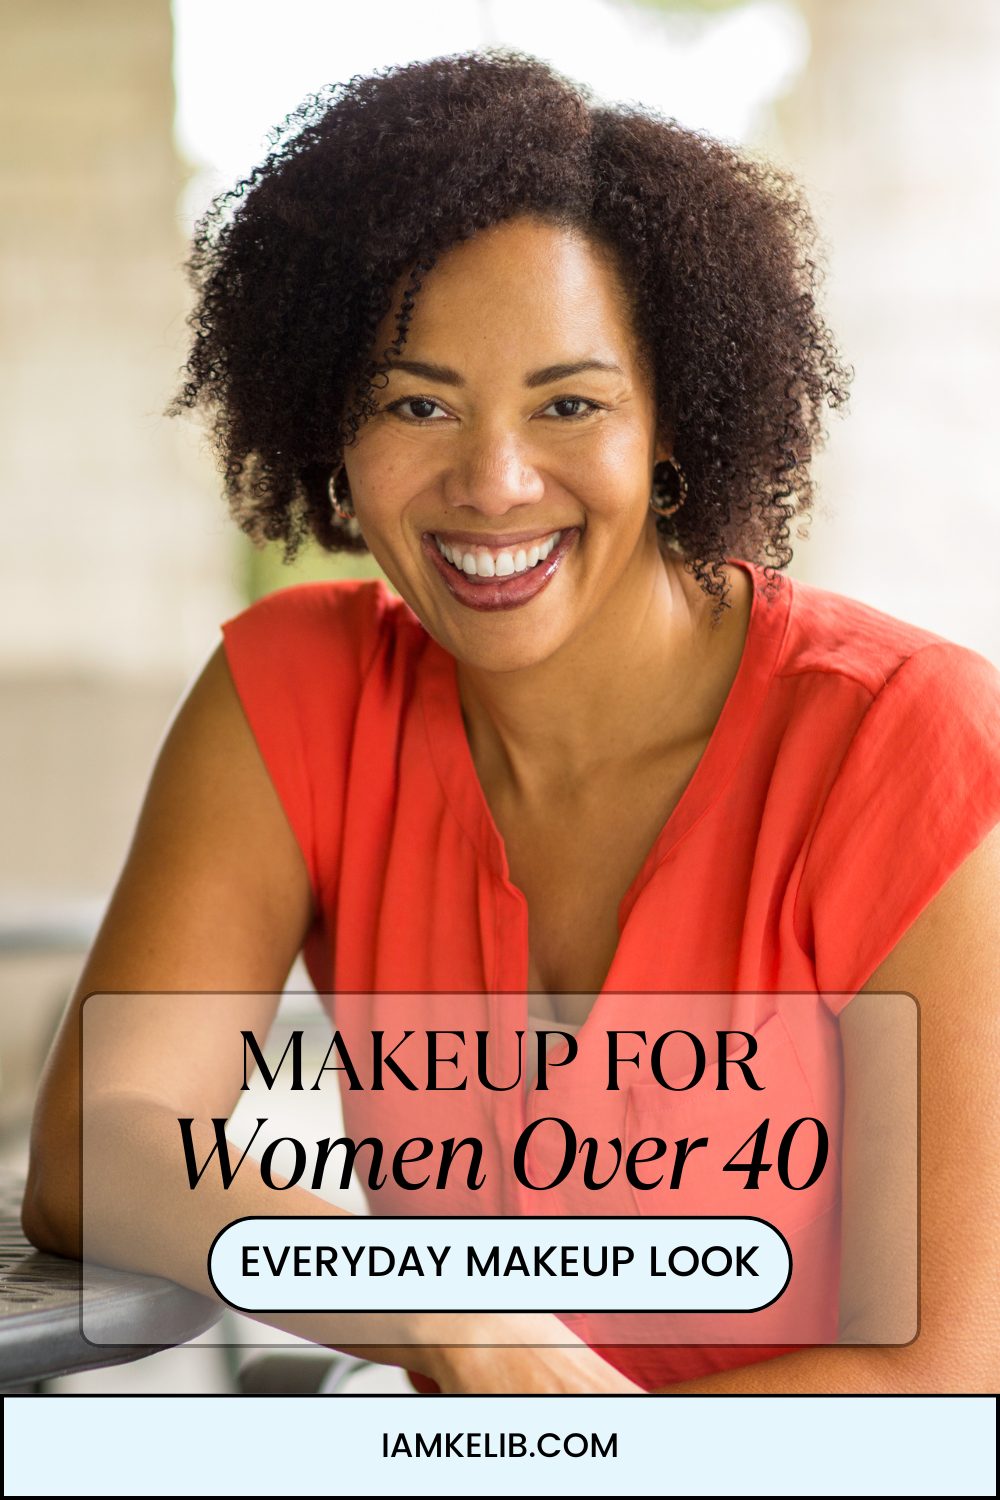 Makeup for Women Over 40